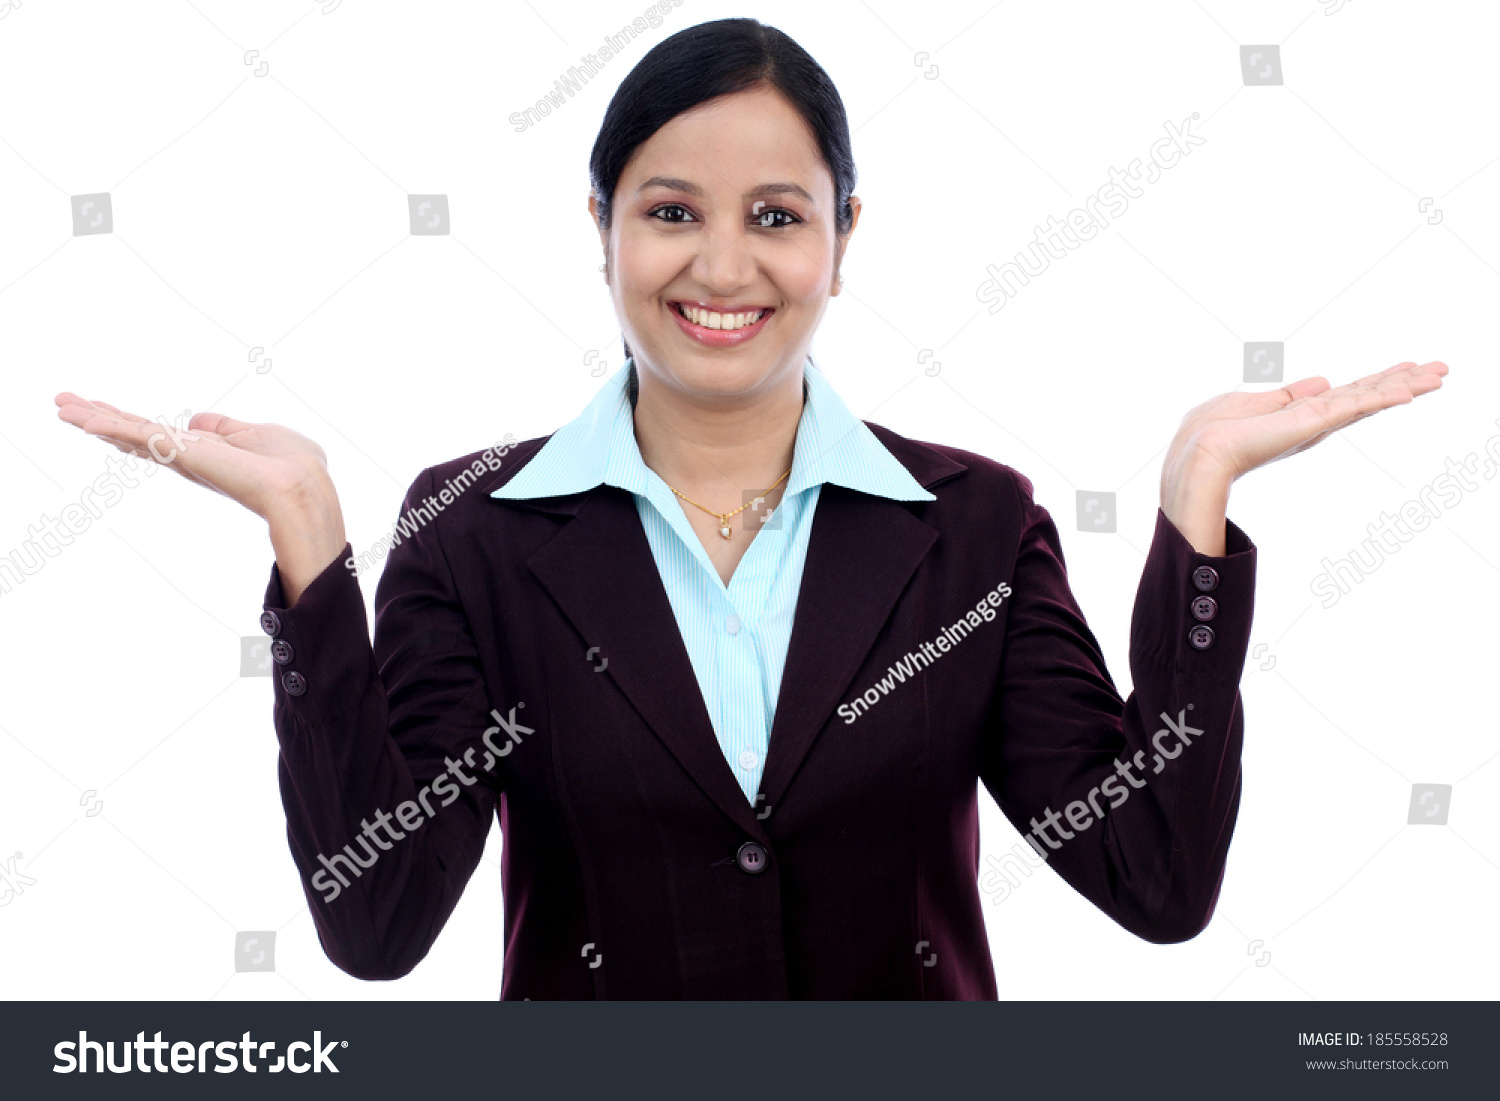 Excited young business woman against white background #185558528